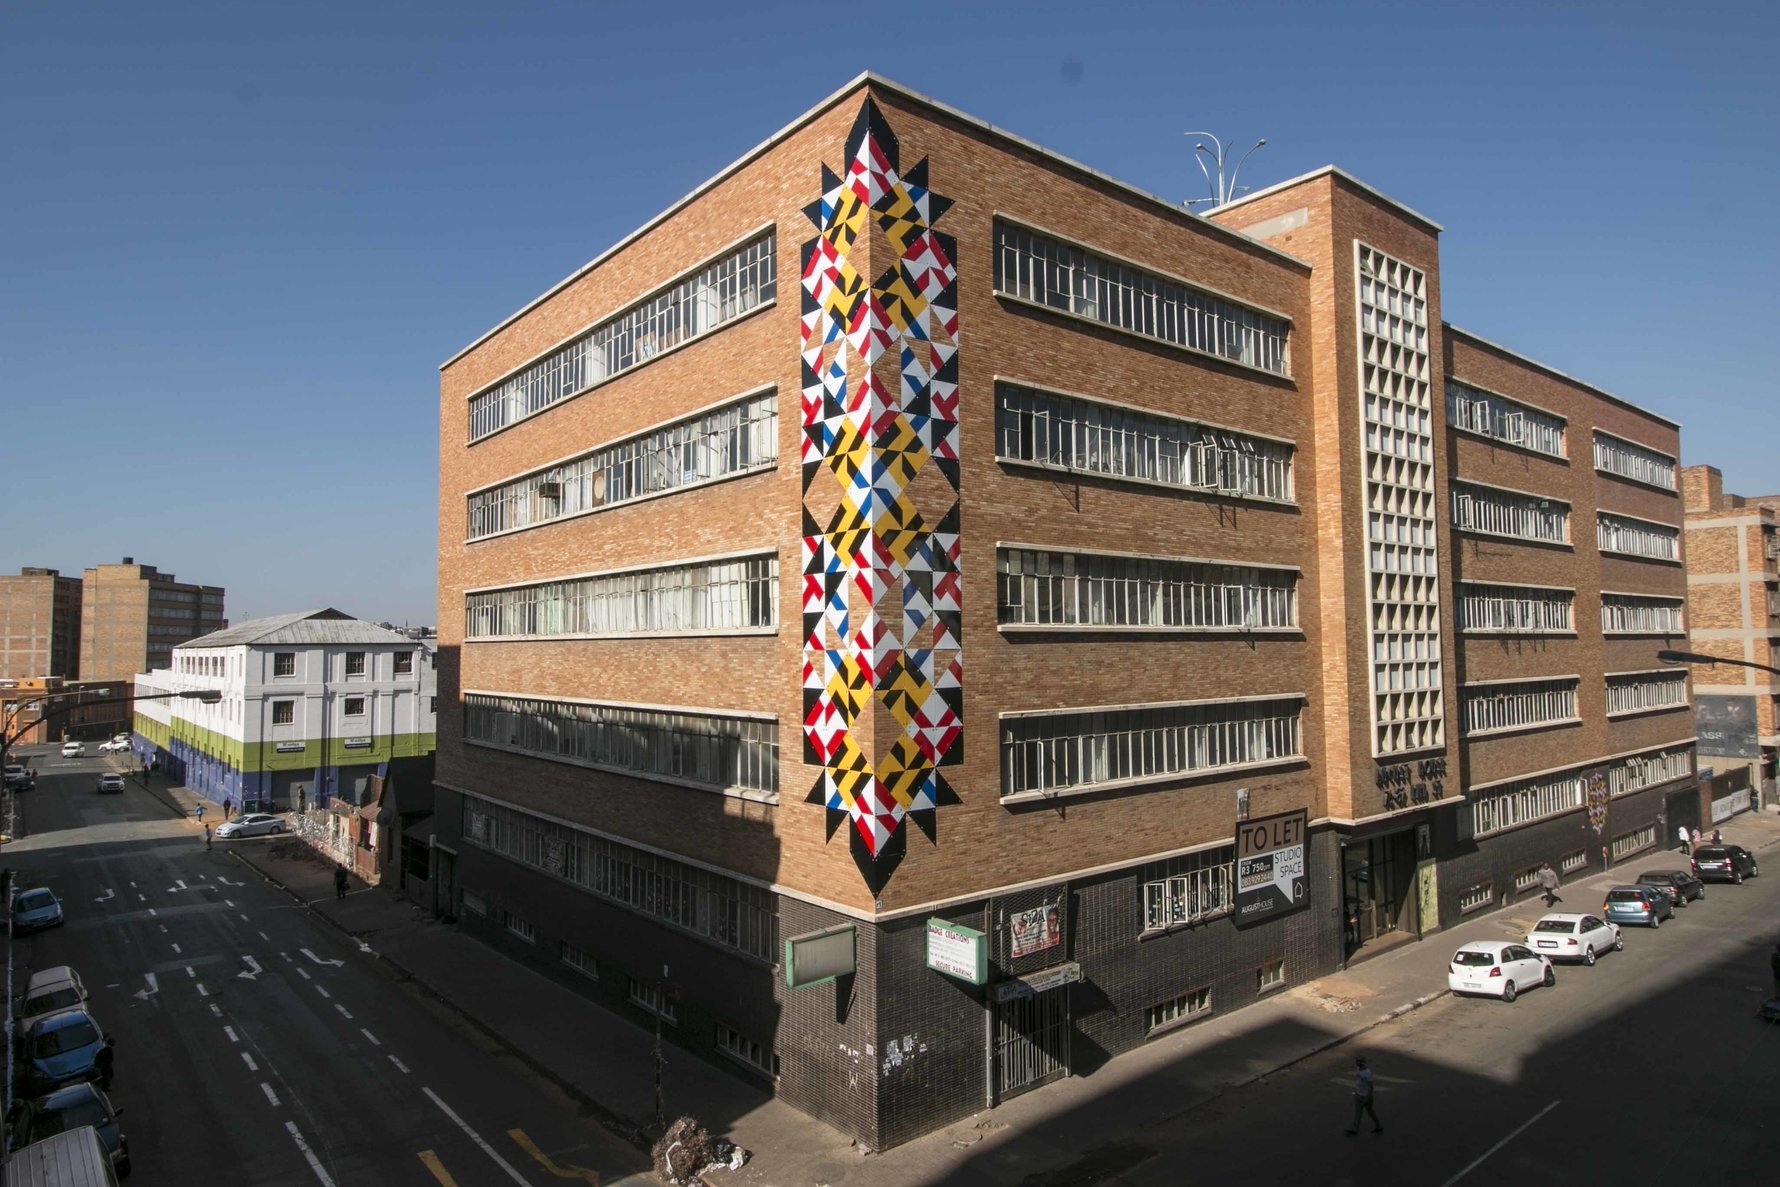 August House by R1Art - who distinctive artwork marks out the building